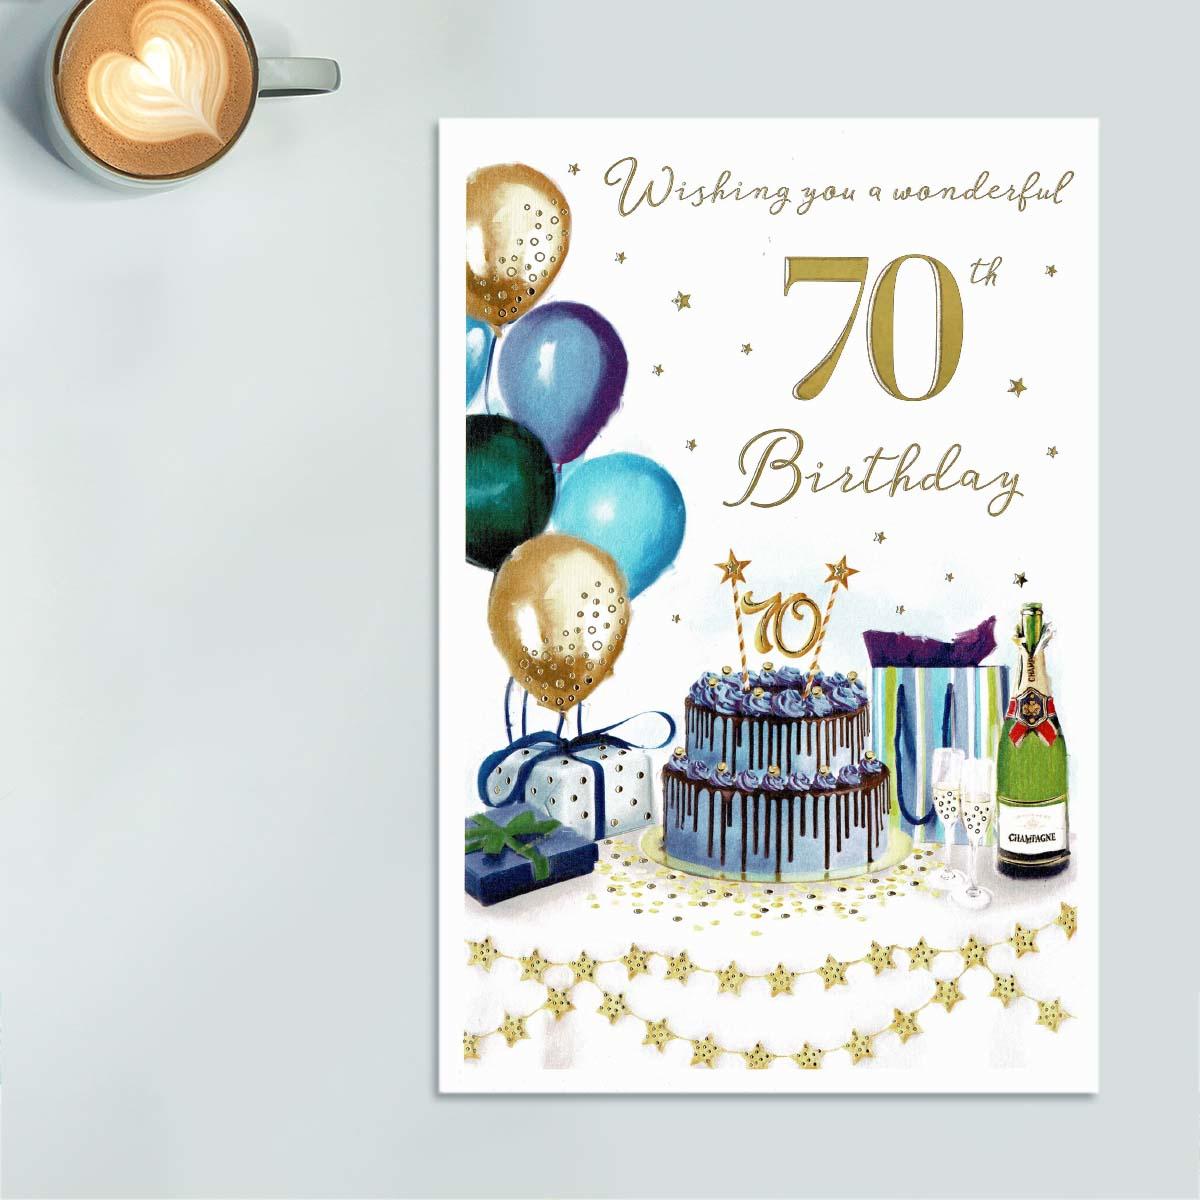 A Wonderful 70th Birthday Card Front Image